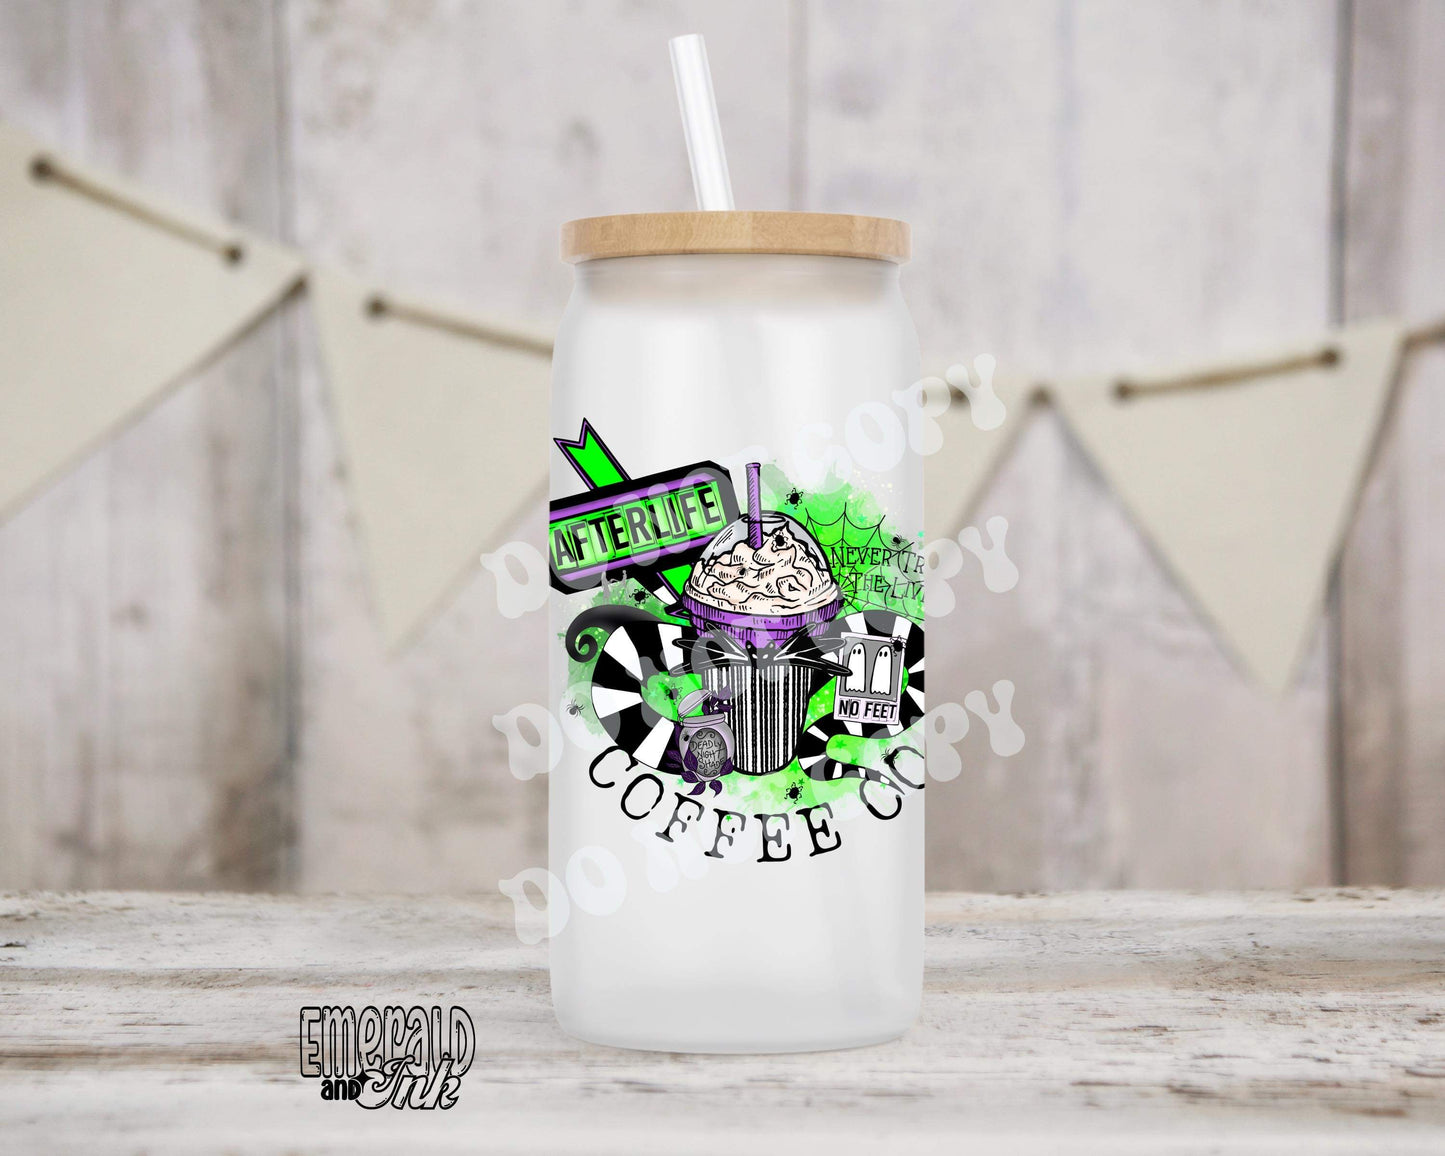 Afterlife coffee co - Mug/glass can Size Sublimation Transfer